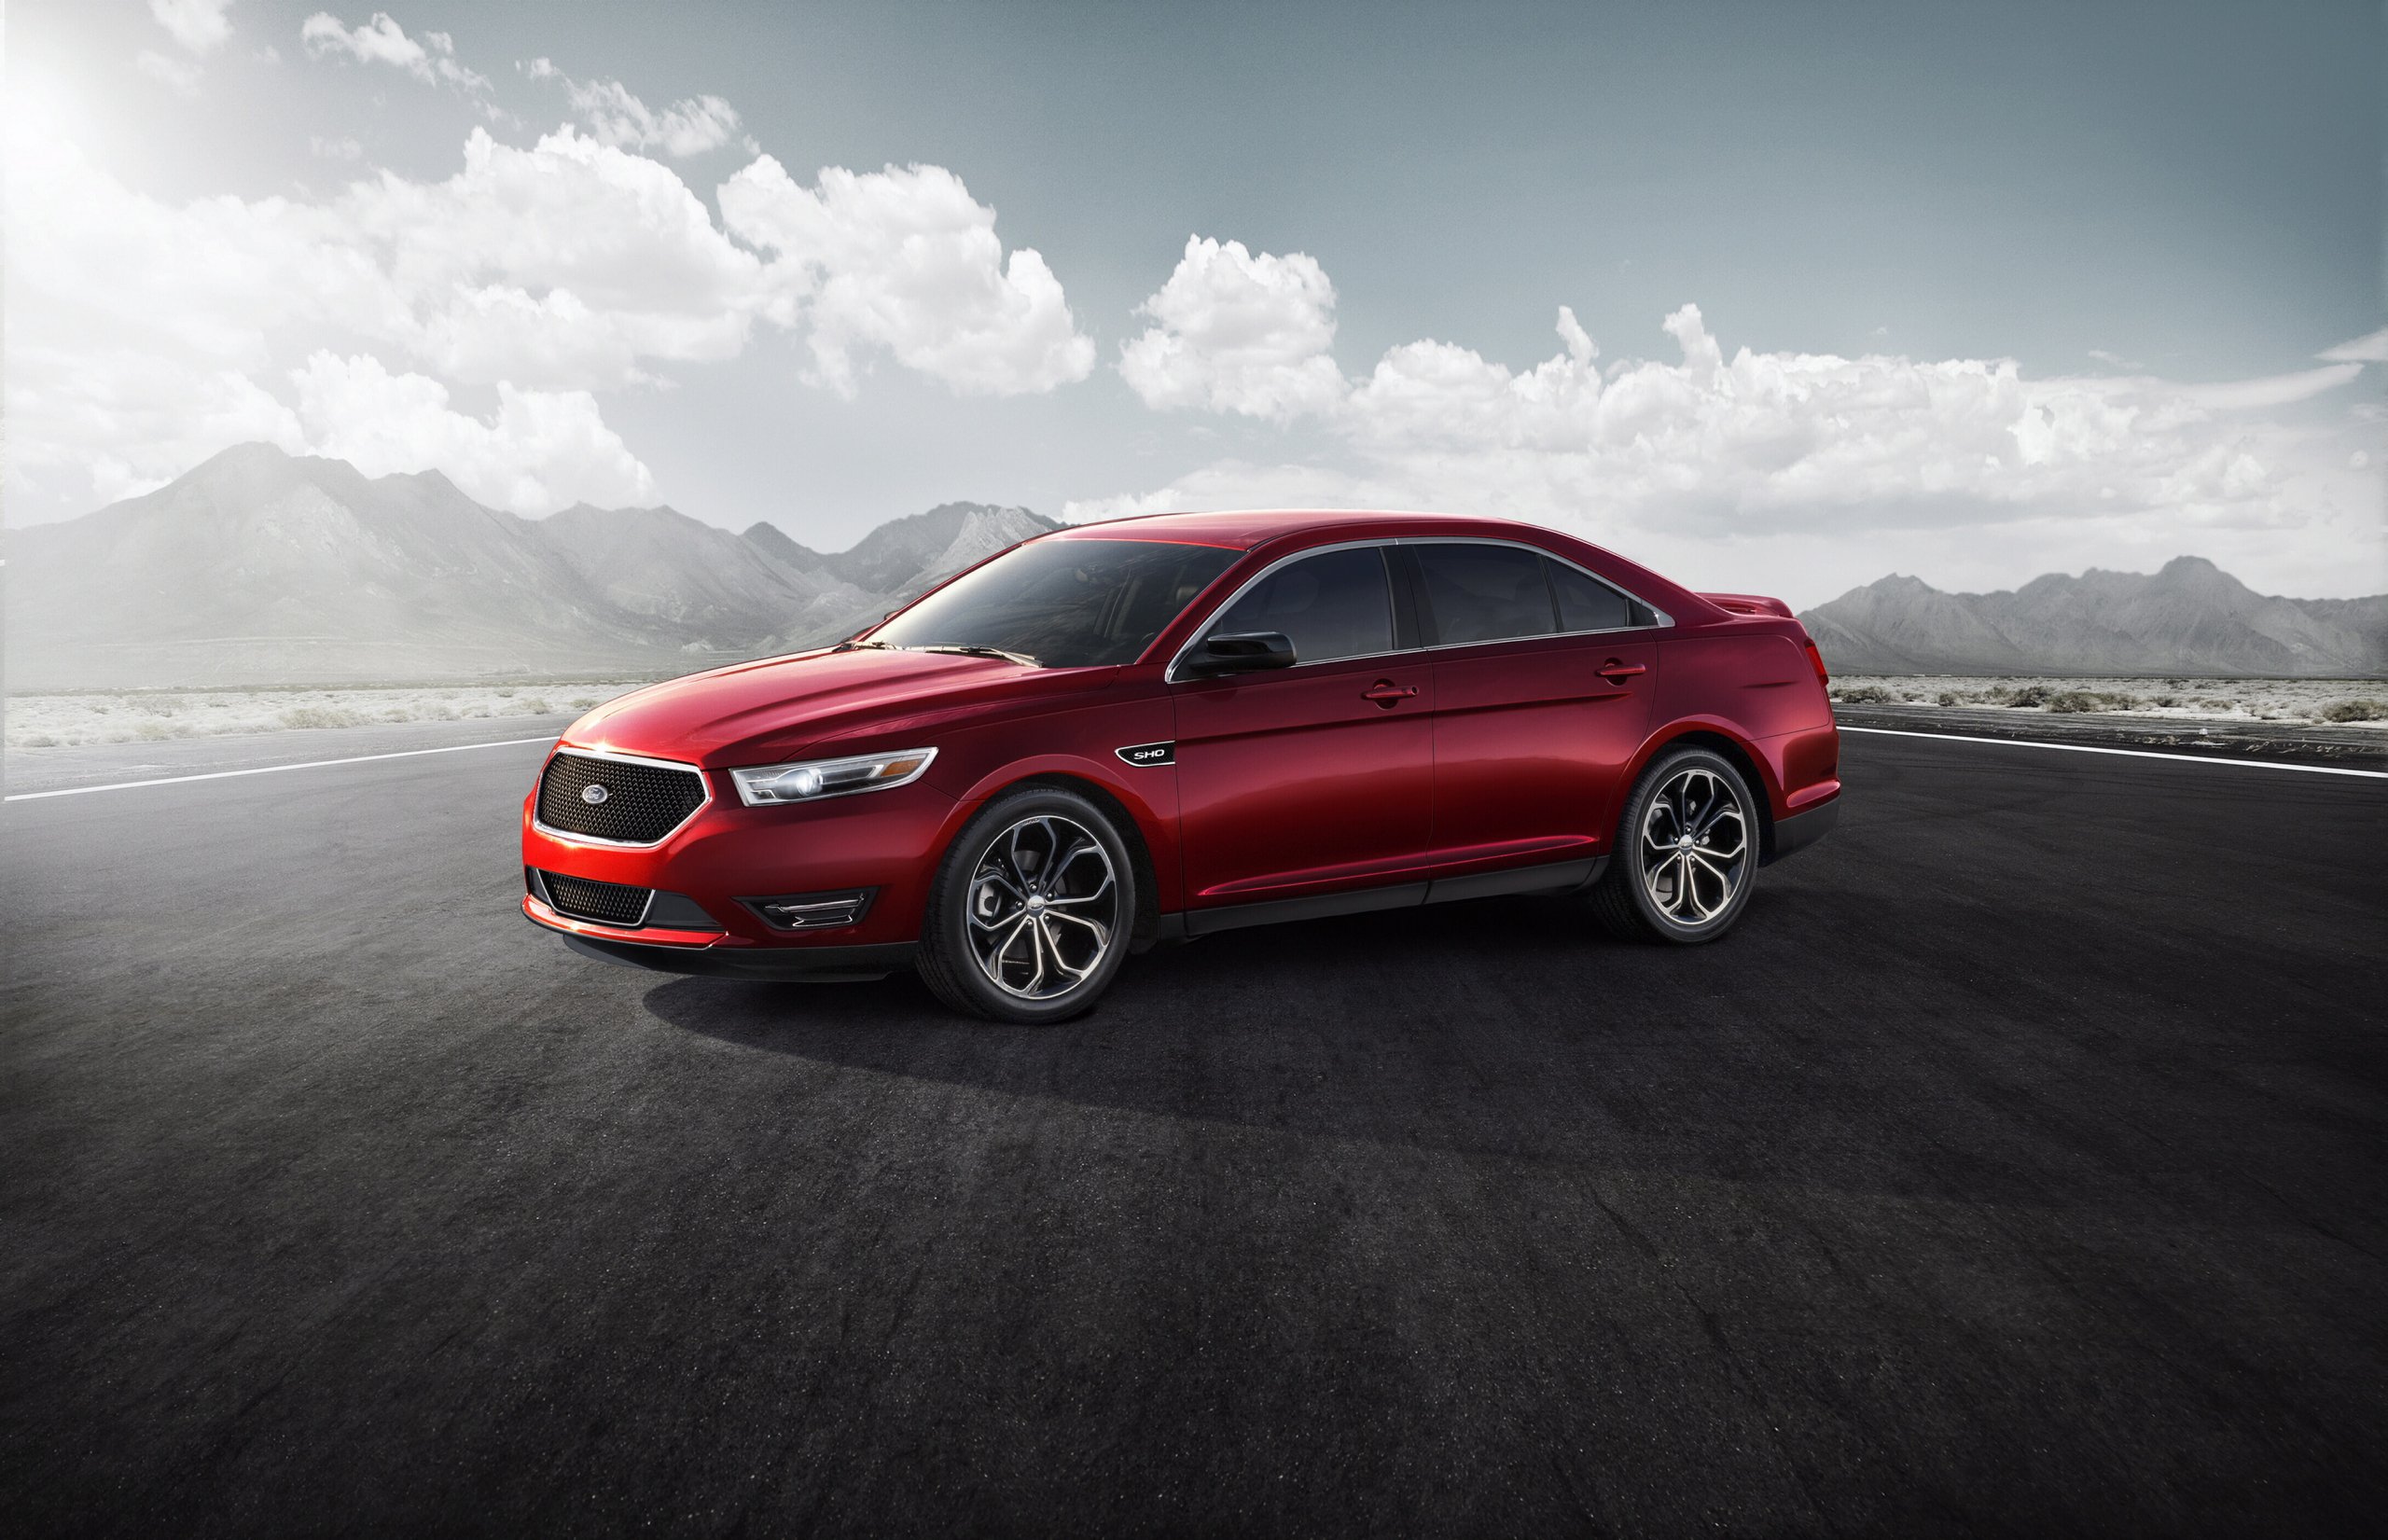 Ford Taurus Sho Pics, Vehicles Collection